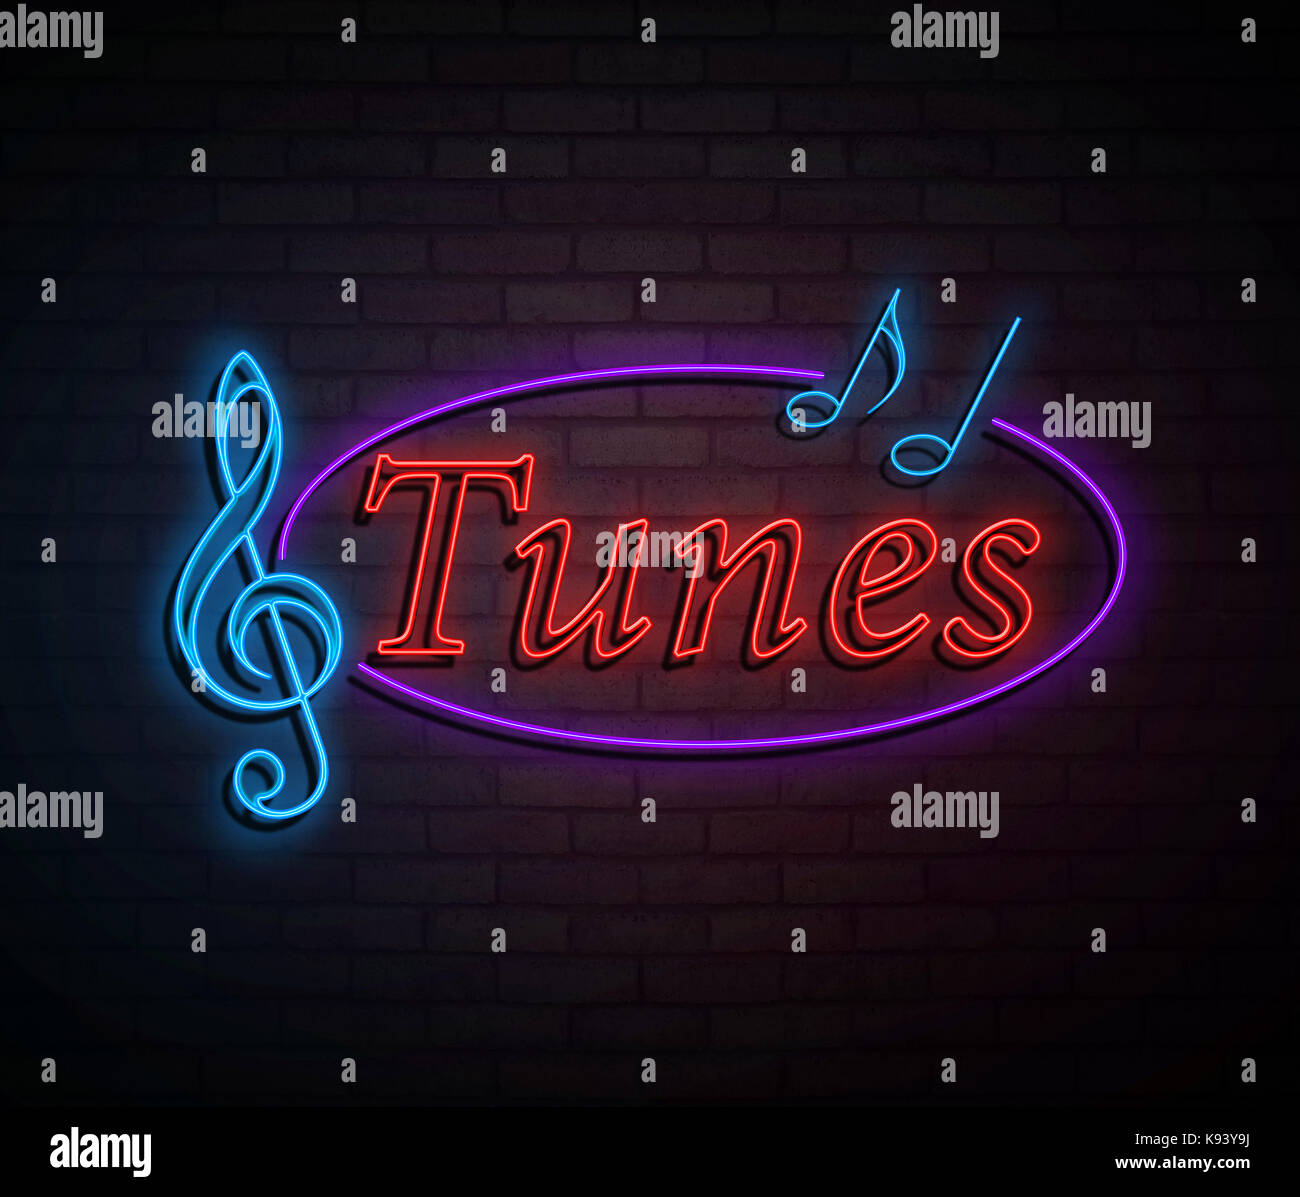 3d Illustration depicting an illuminated neon sign with a tunes concept. Stock Photo